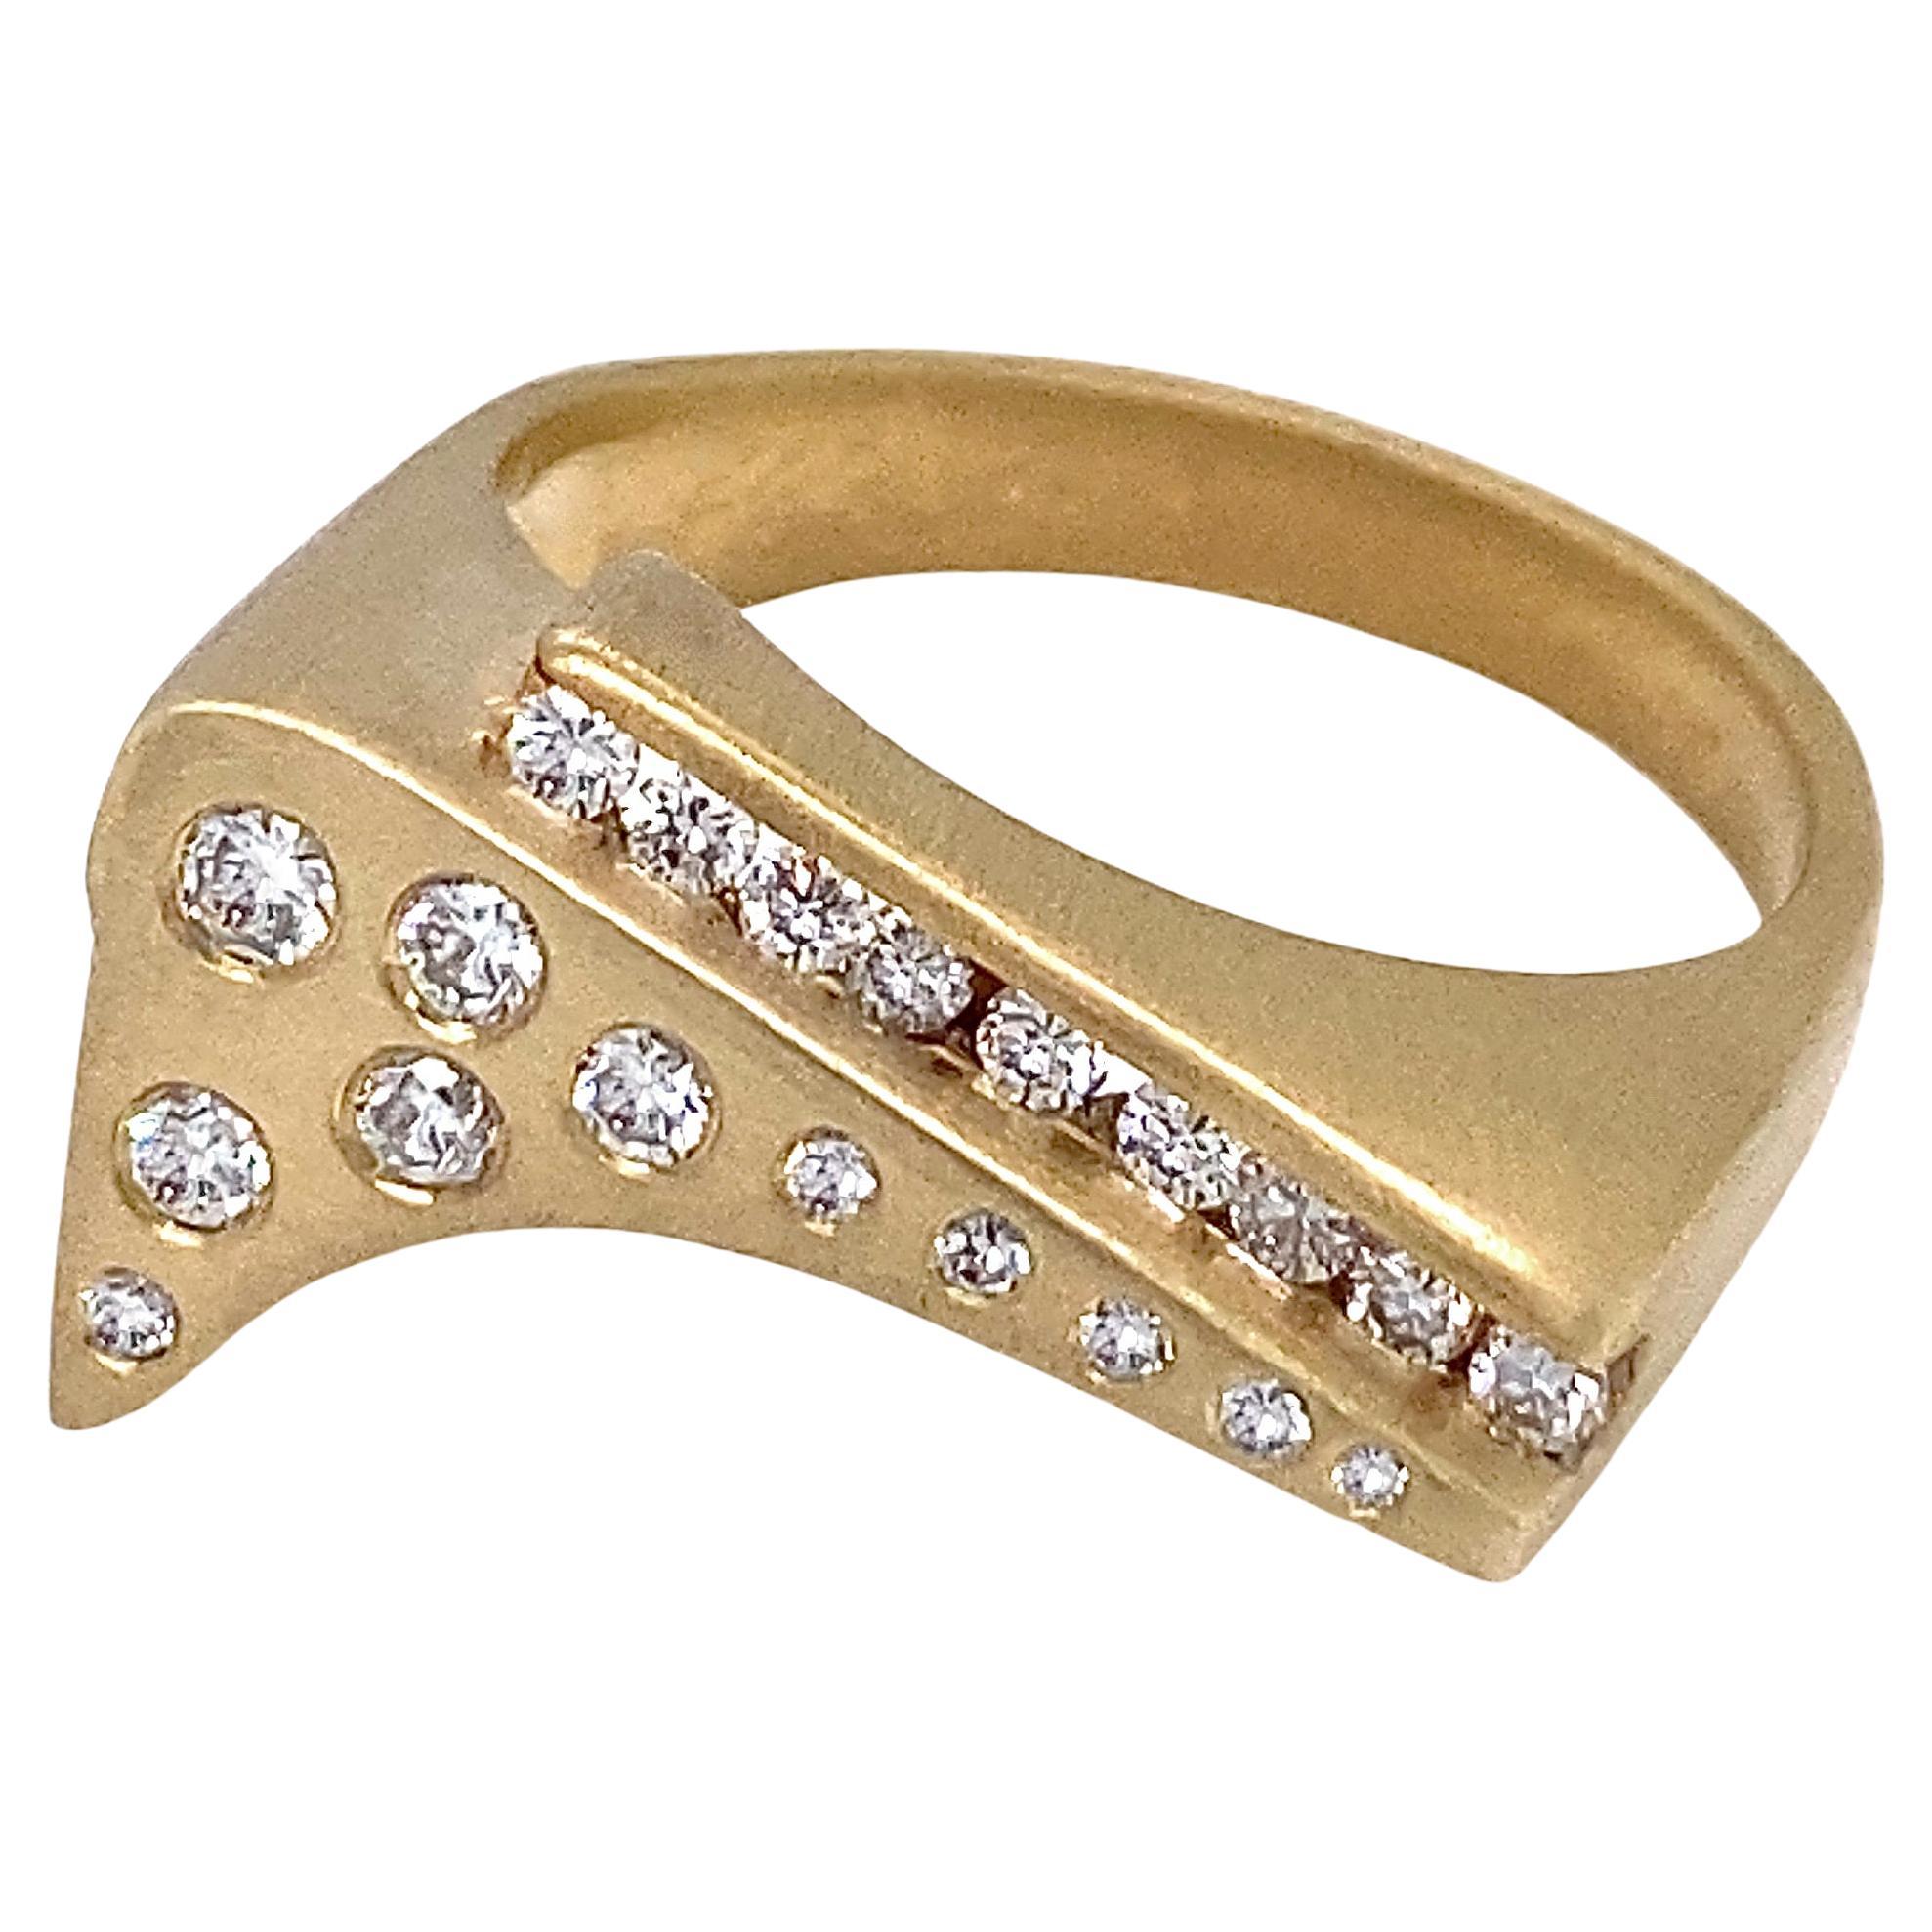 "Quarter Pipe" Ring in 18K Yellow Gold Scattered with 0.38 Carats of Diamonds